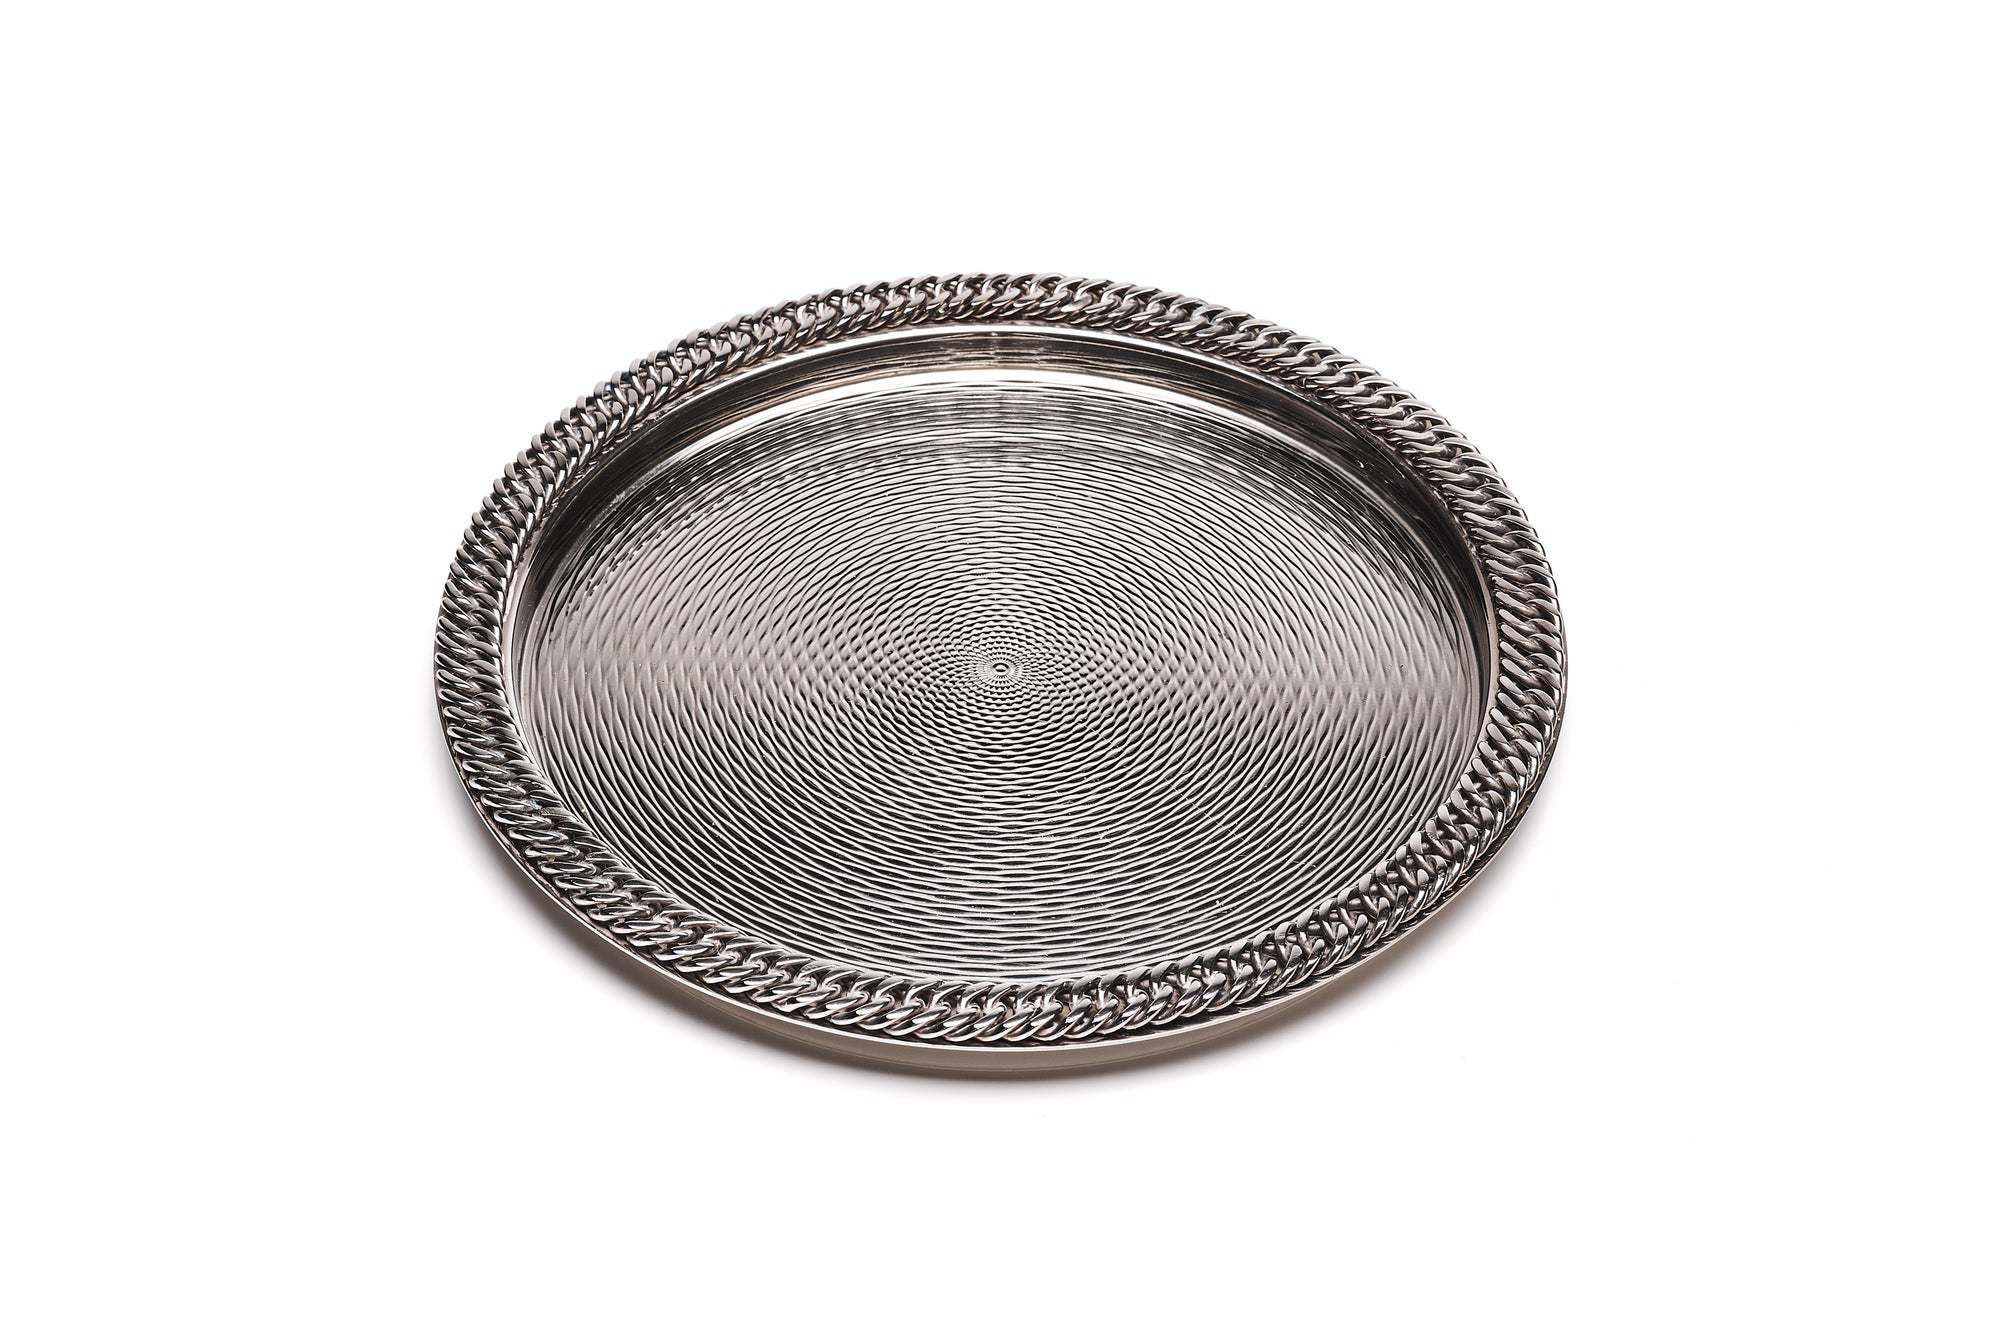 Hermes Chainlink Tray